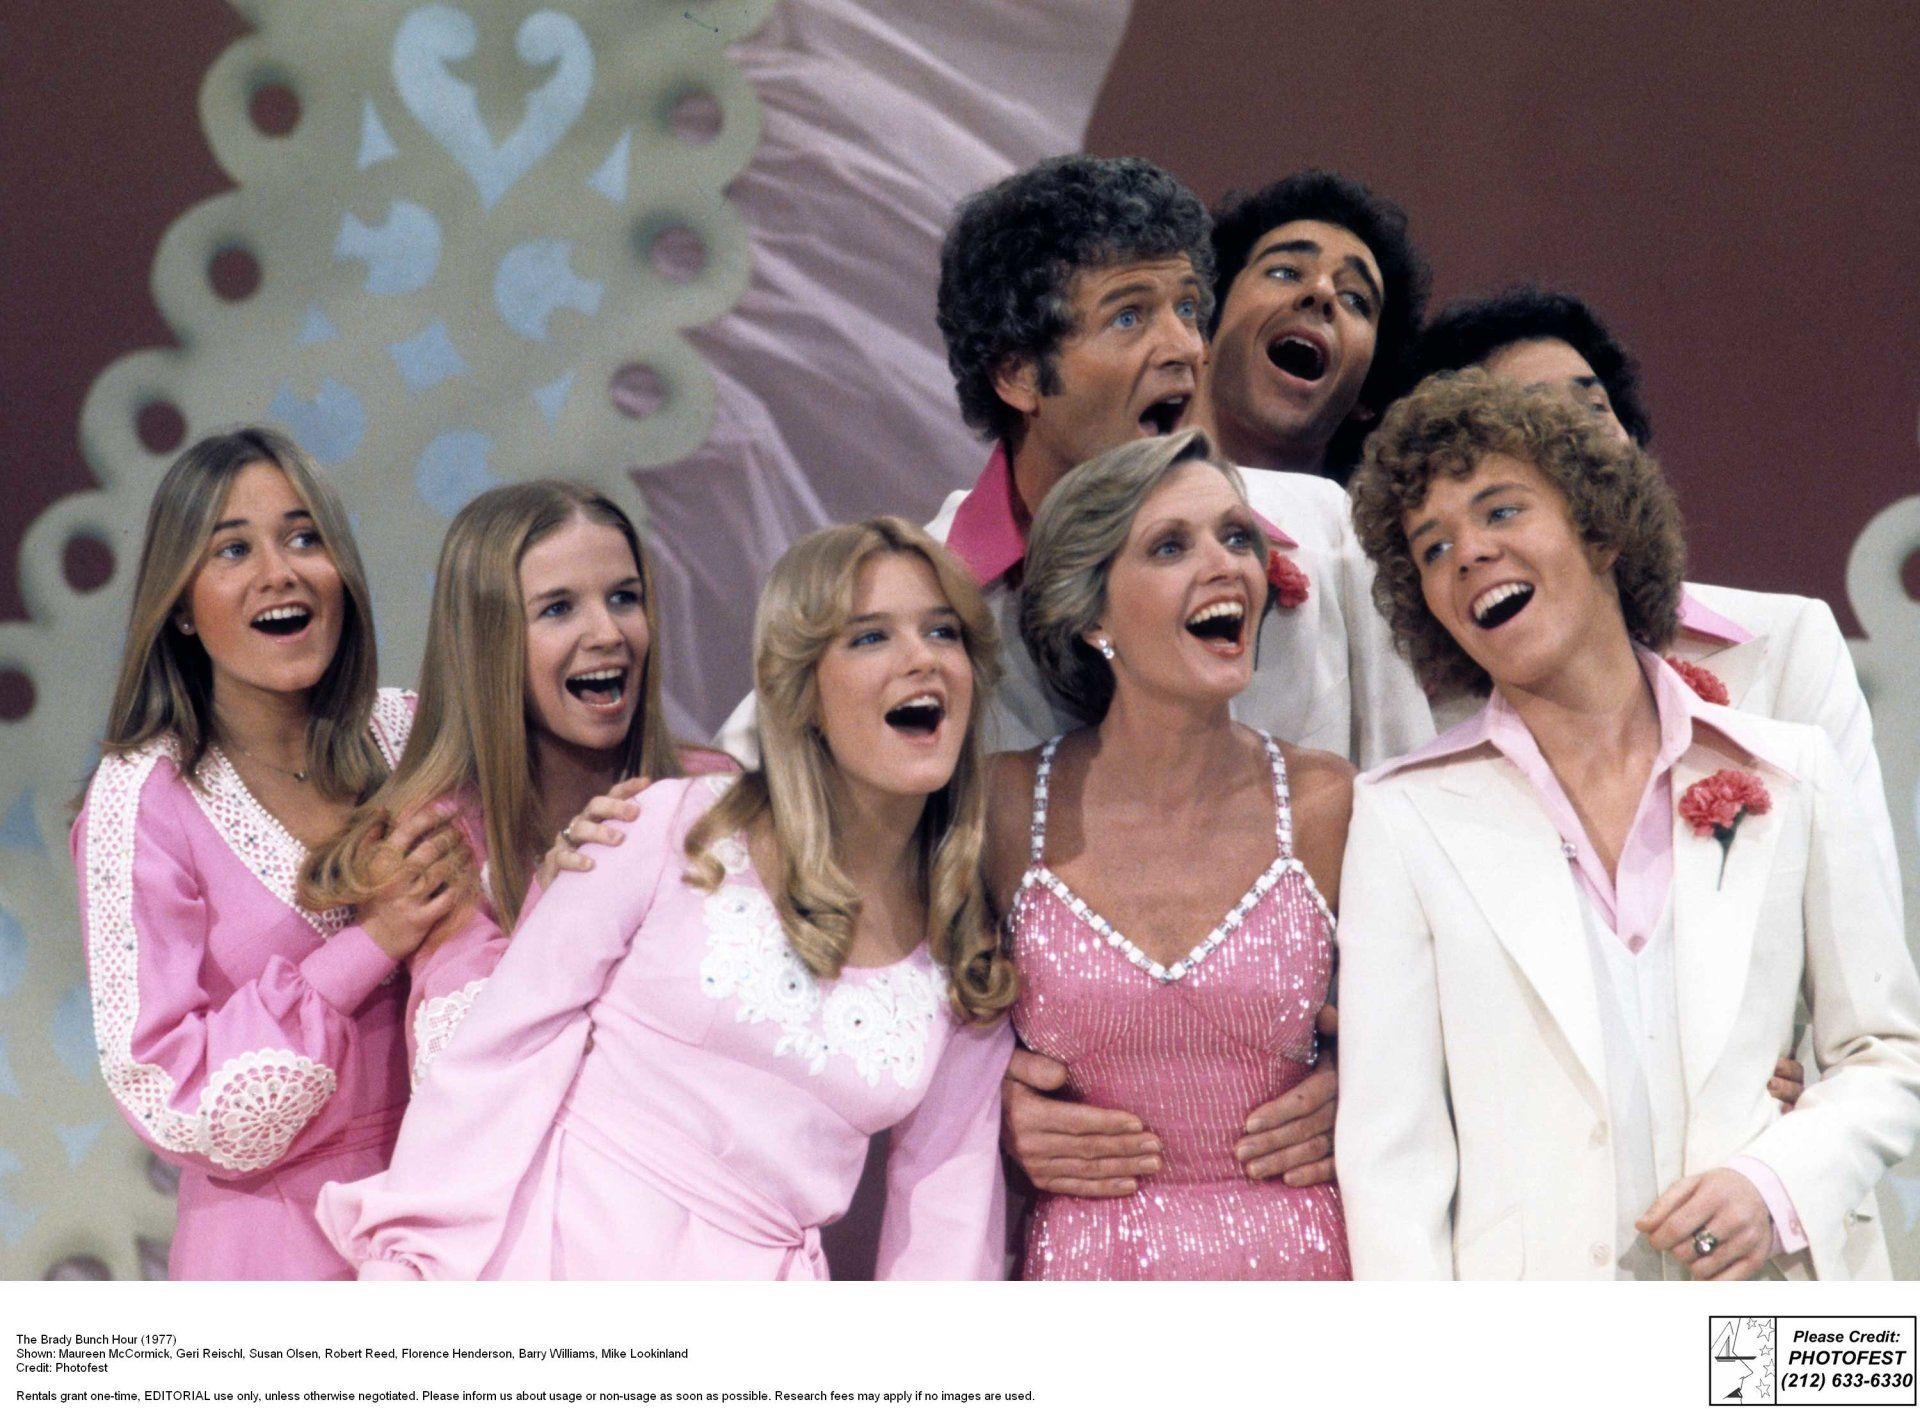 The Brady Bunch Hour HD Wallpaper and Background Image